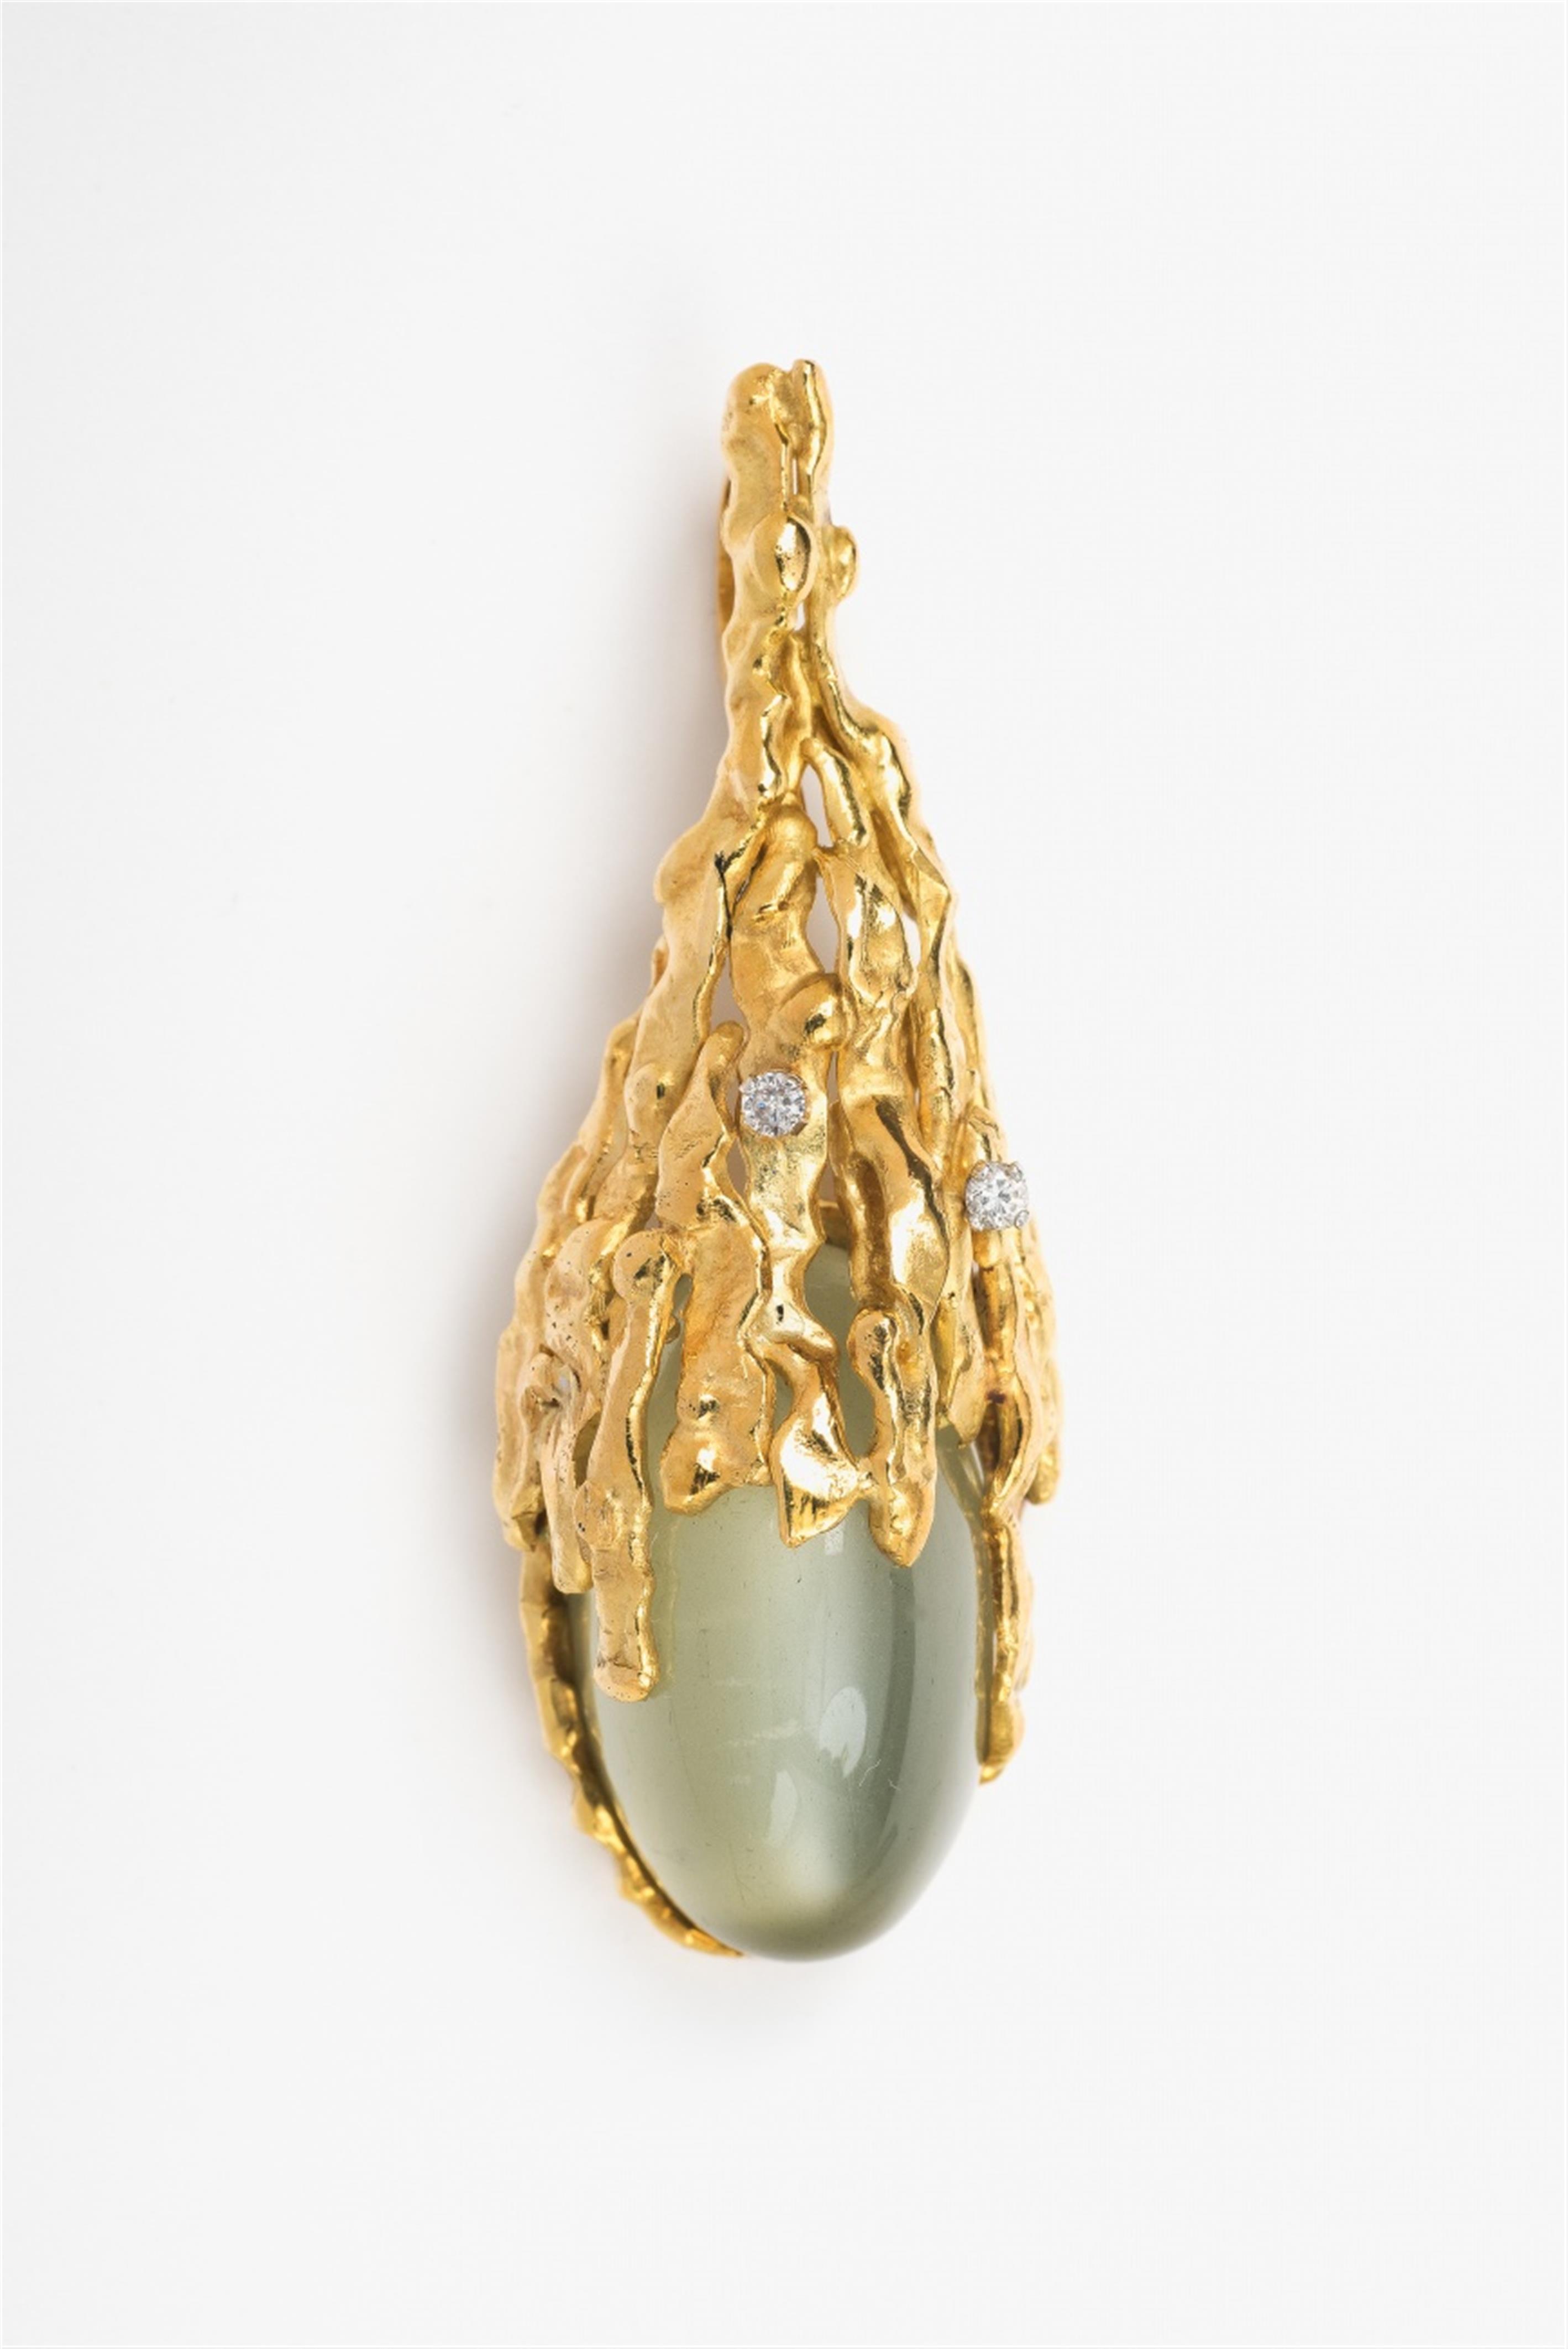 A gold and moonstone pendant - image-1